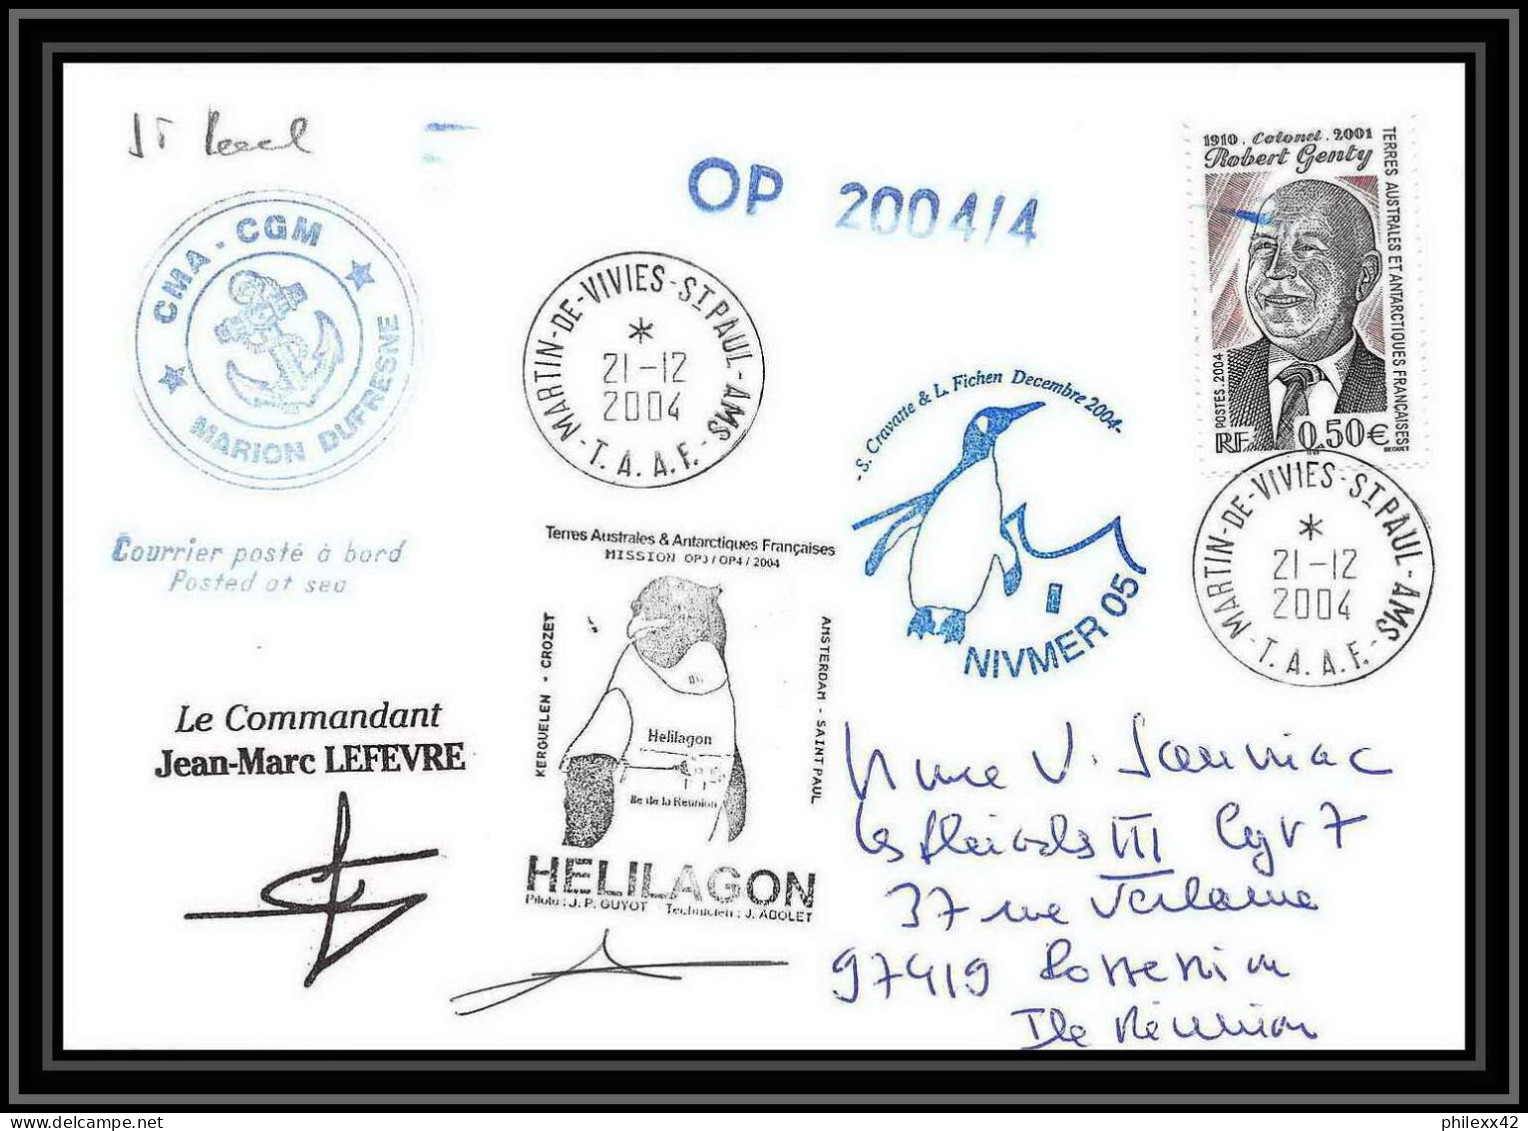 2480 ANTARCTIC Terres Australes TAAF Lettre Cover Dufresne 2 Signé Signed OP 2004/4 N°392 21/12/2004 Helilagon - Helicópteros